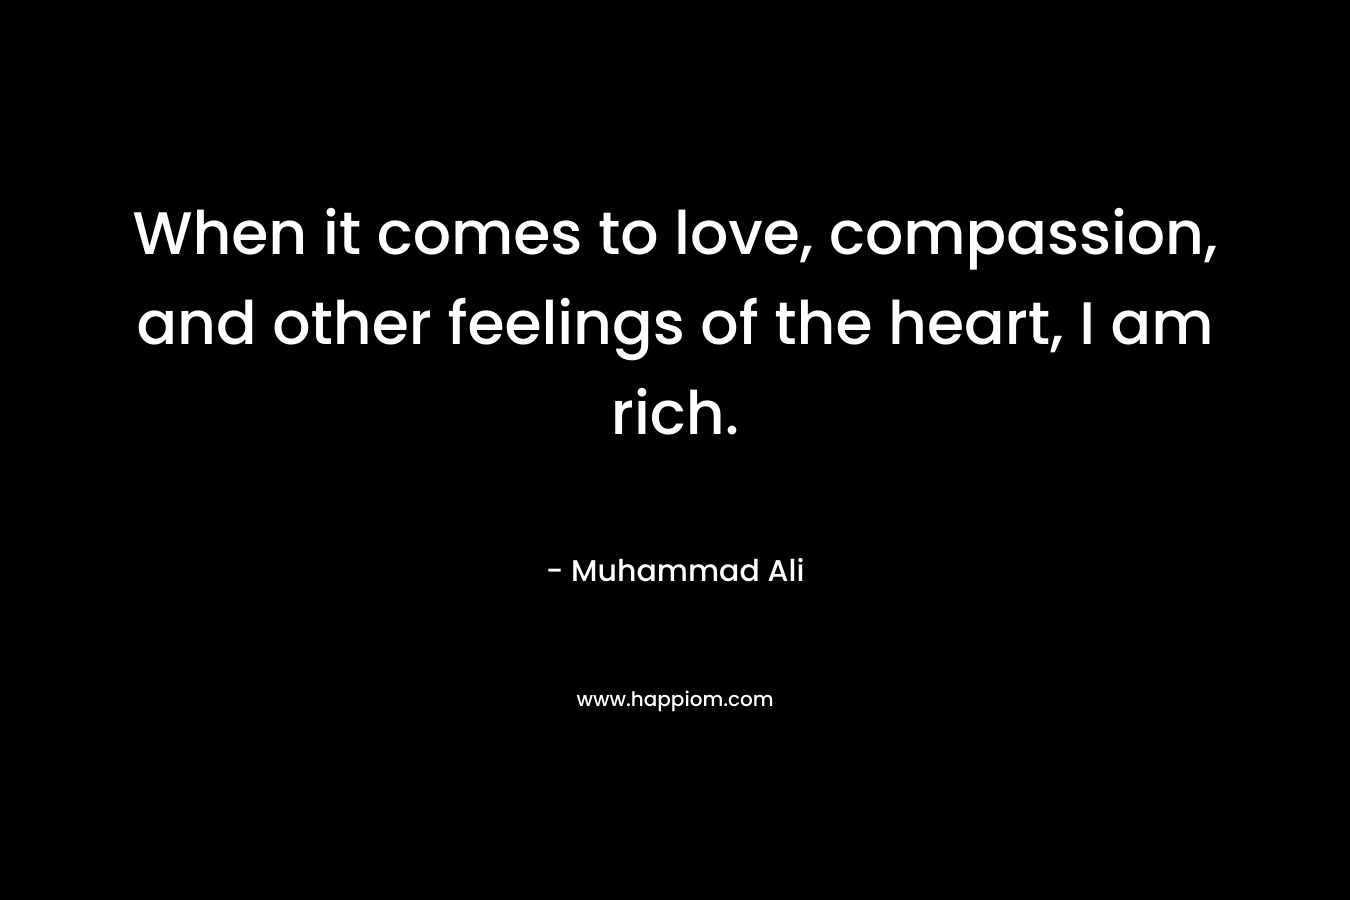 When it comes to love, compassion, and other feelings of the heart, I am rich.